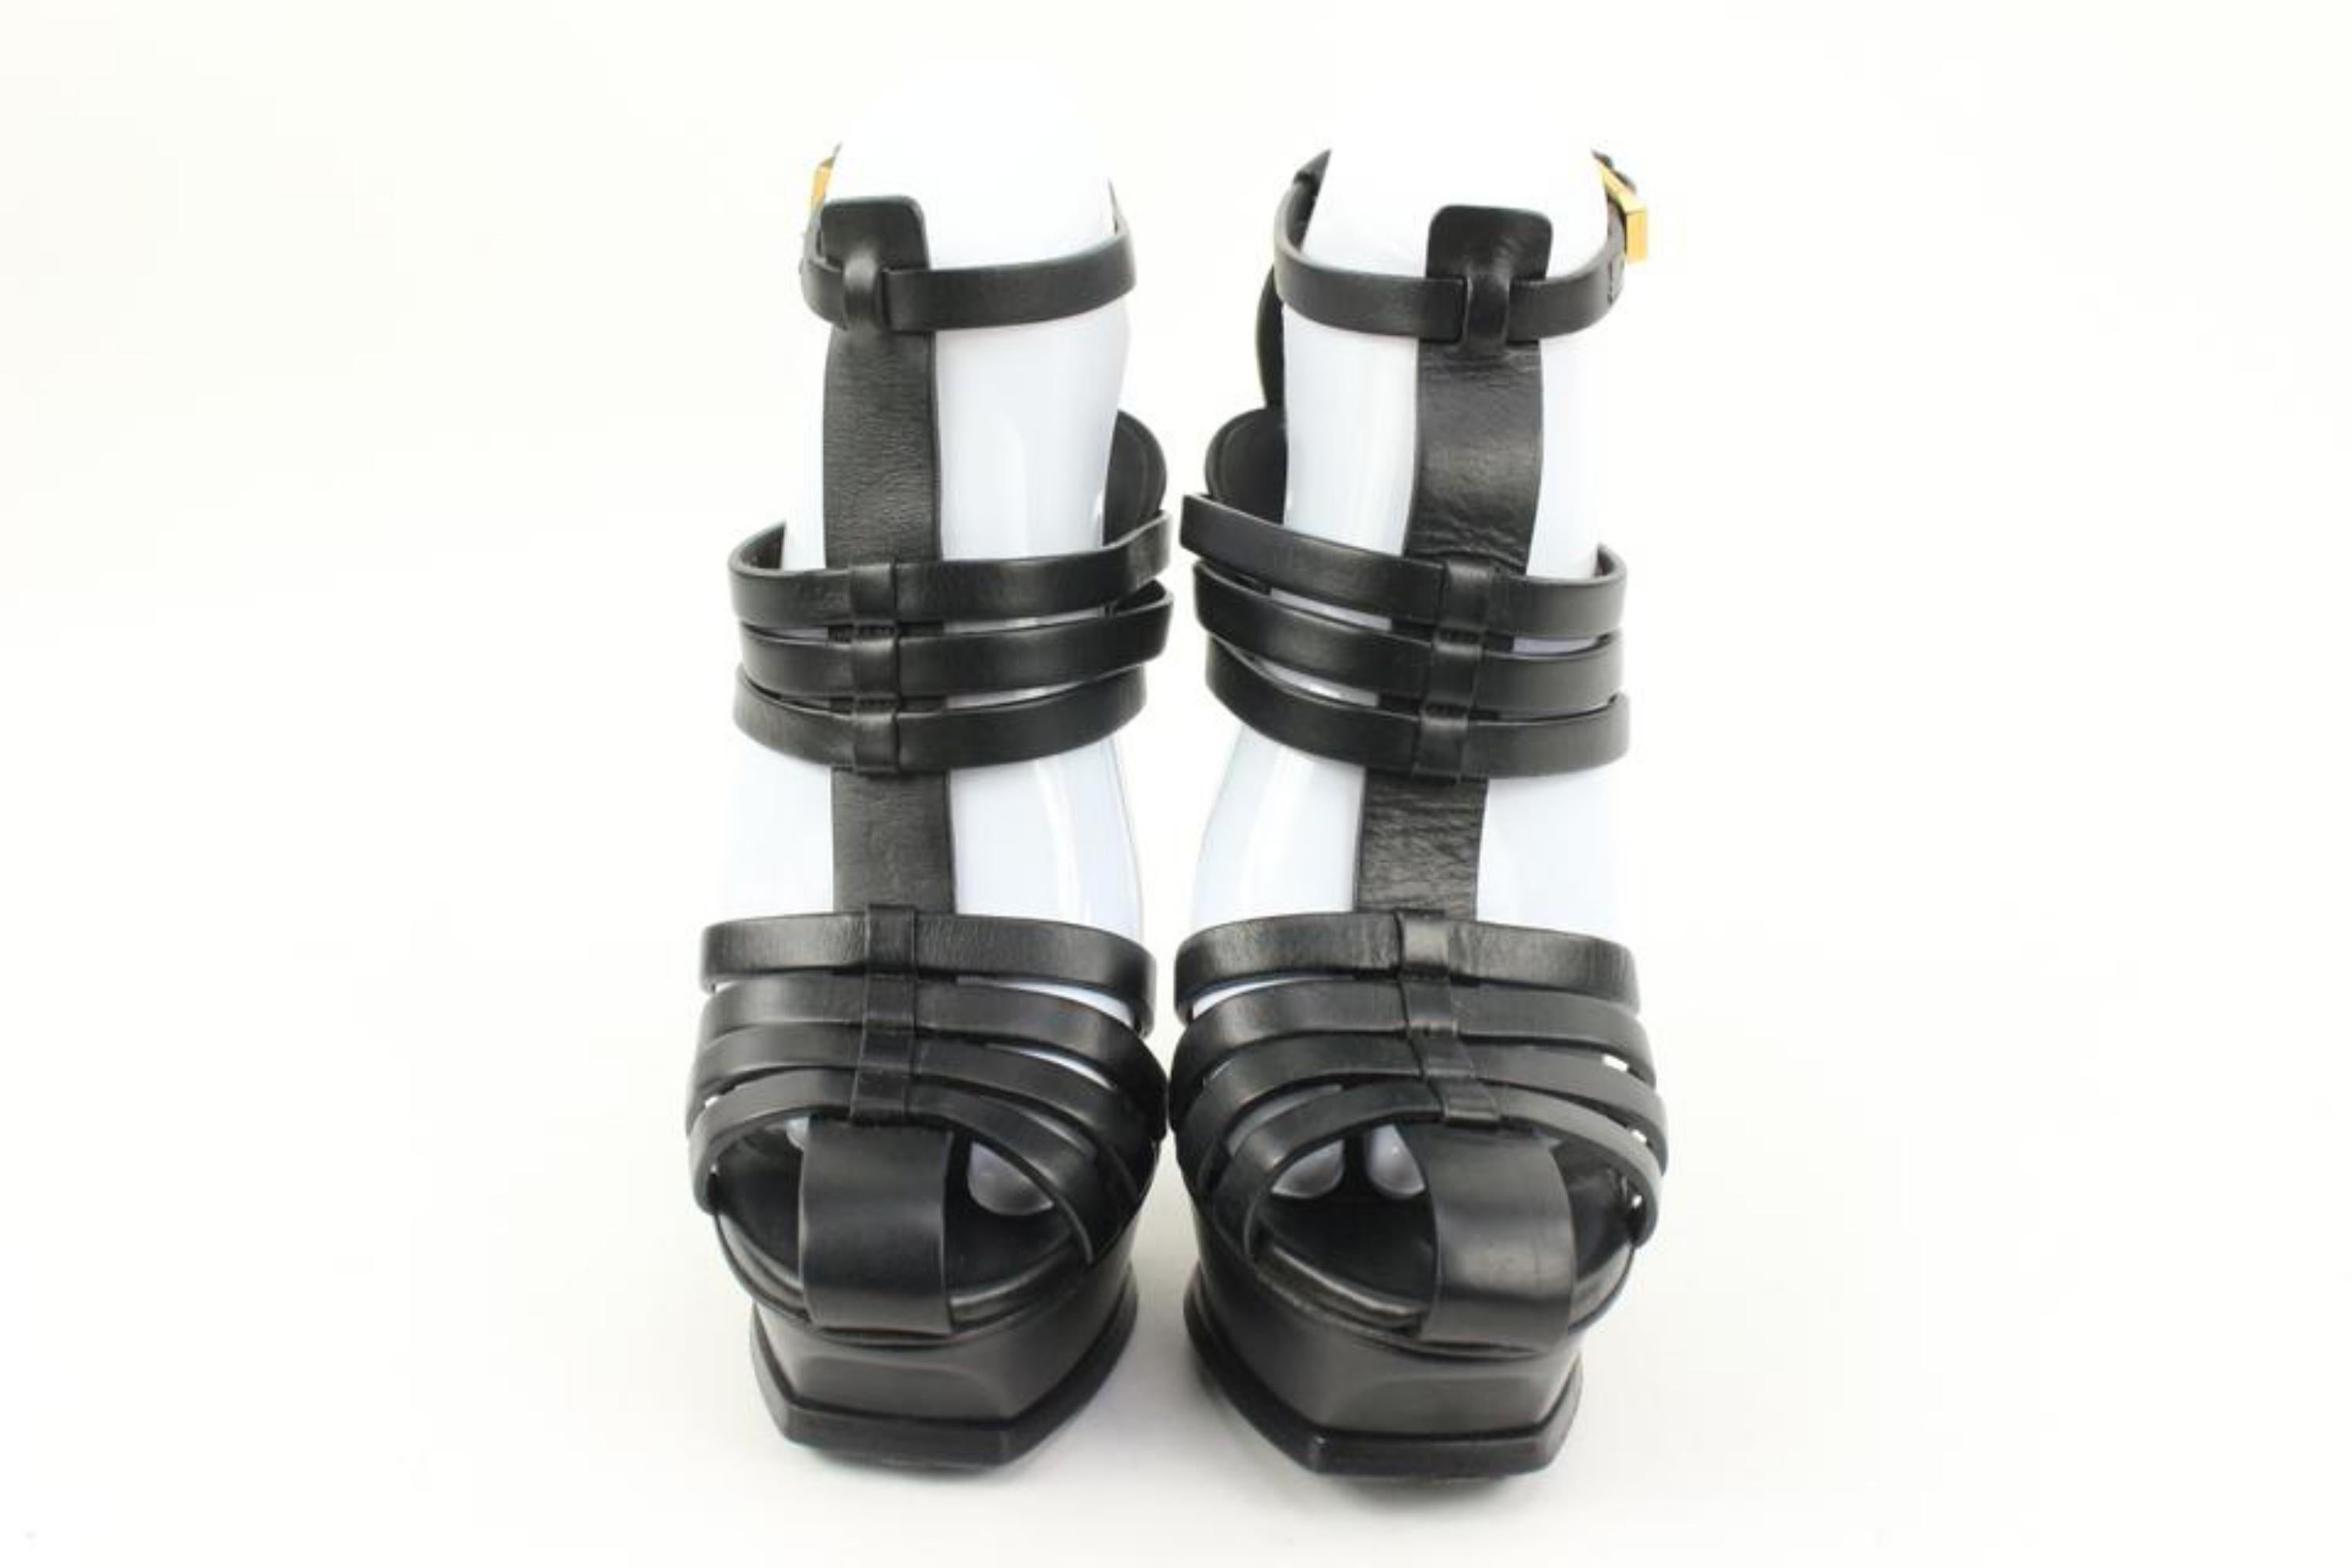 Saint Laurent Size 37 YSL Calfskin Tribute 105 Platform Woodstock Sandals 5ysl22 In Good Condition For Sale In Dix hills, NY